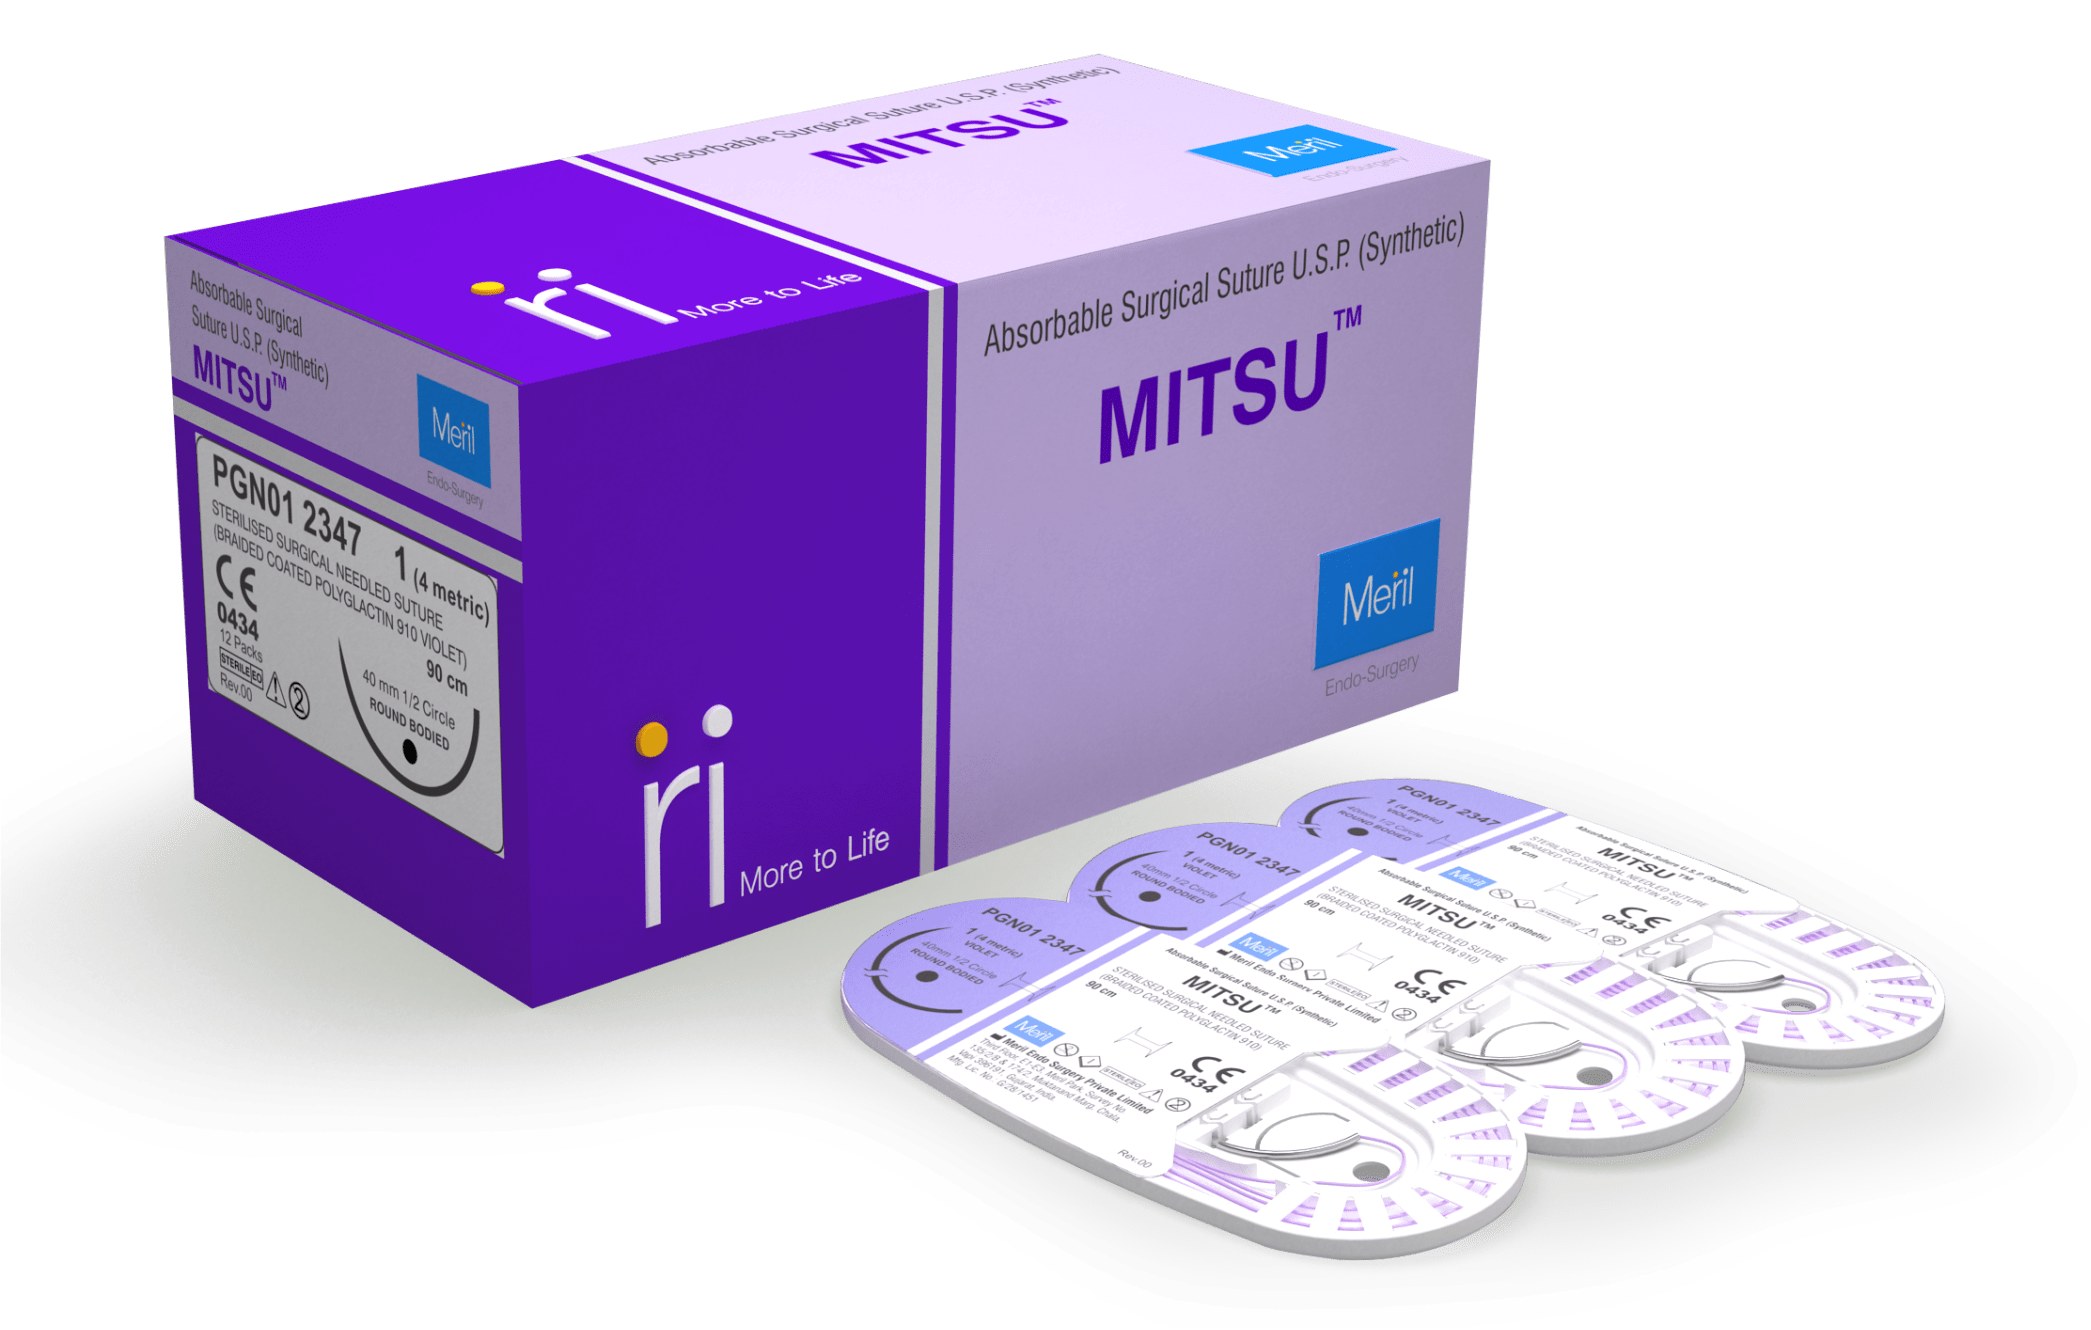 Mitsu - Absorbable Ophthalmic Suture